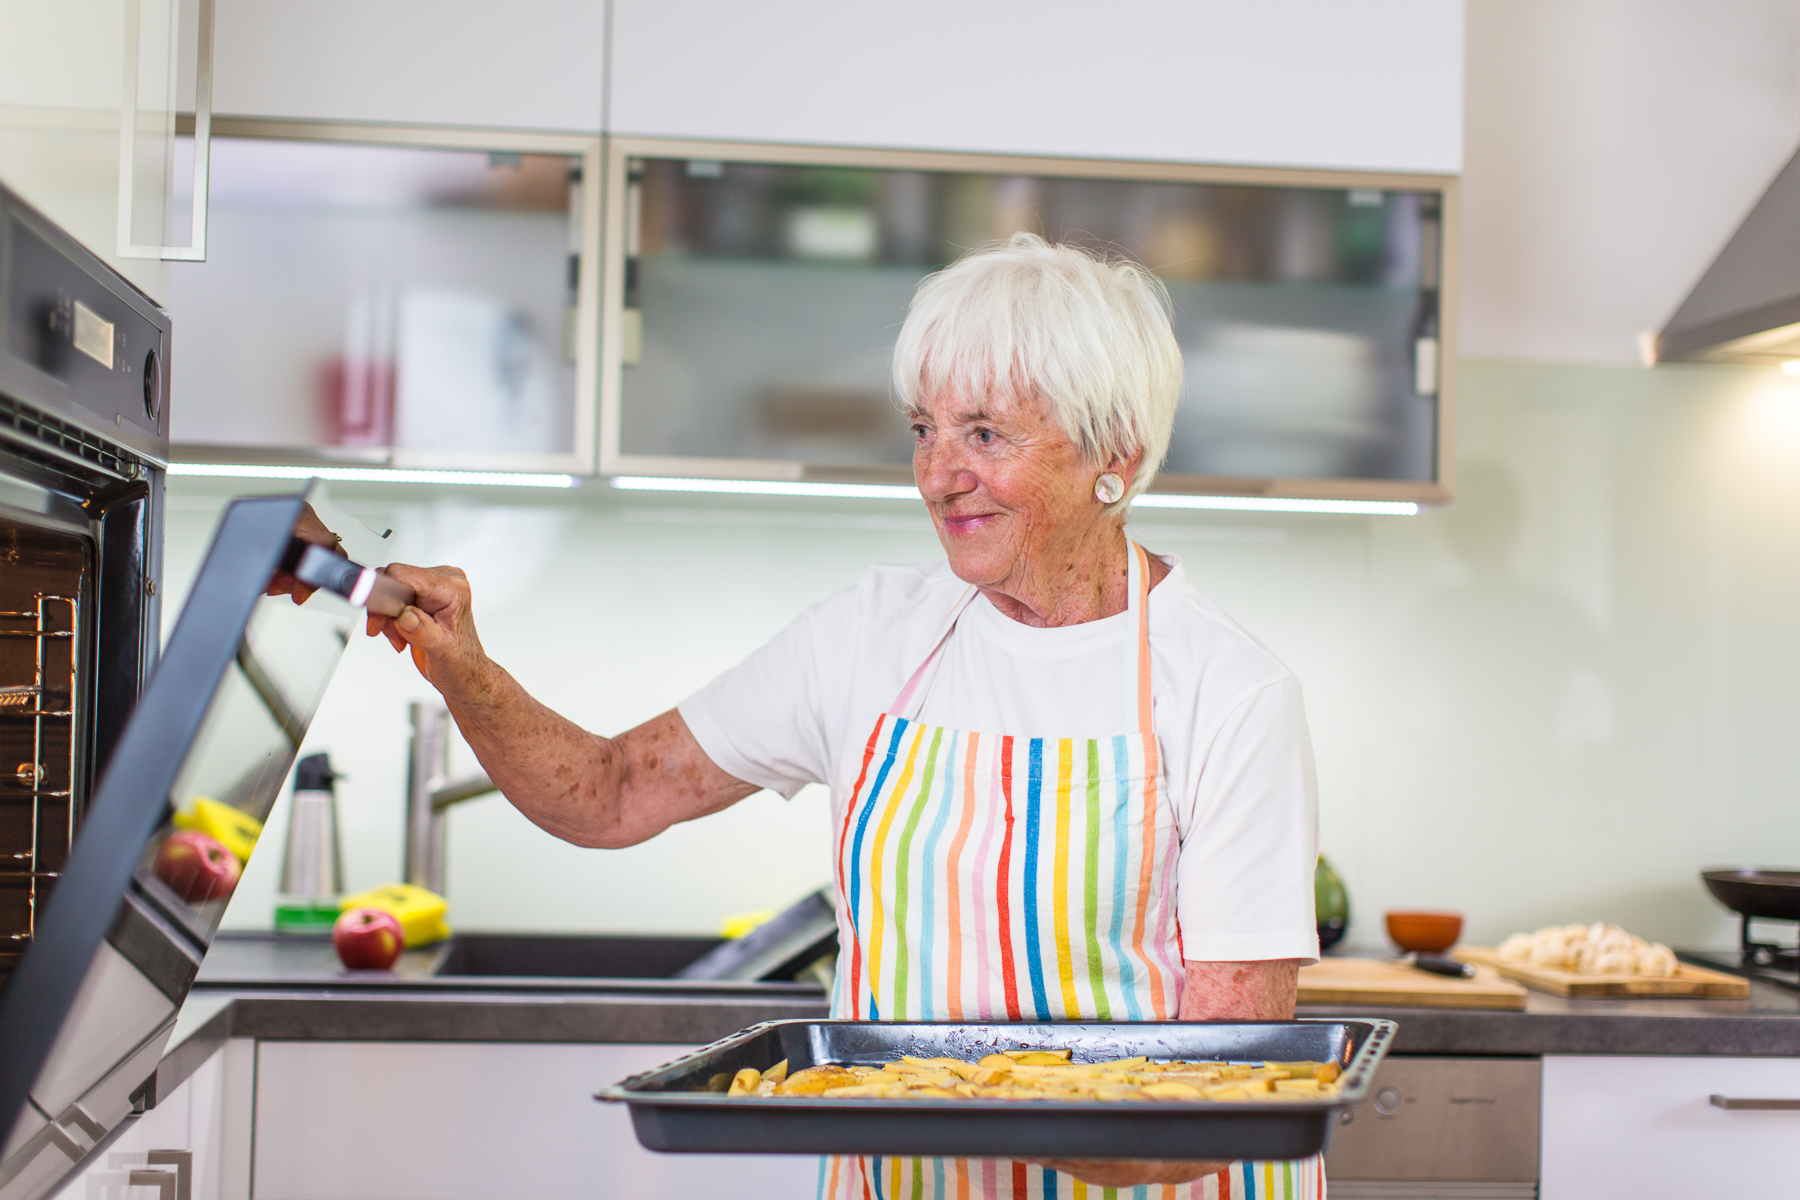 Senior Woman Cooking In The Kitchen   Eating And Cooking Healthy